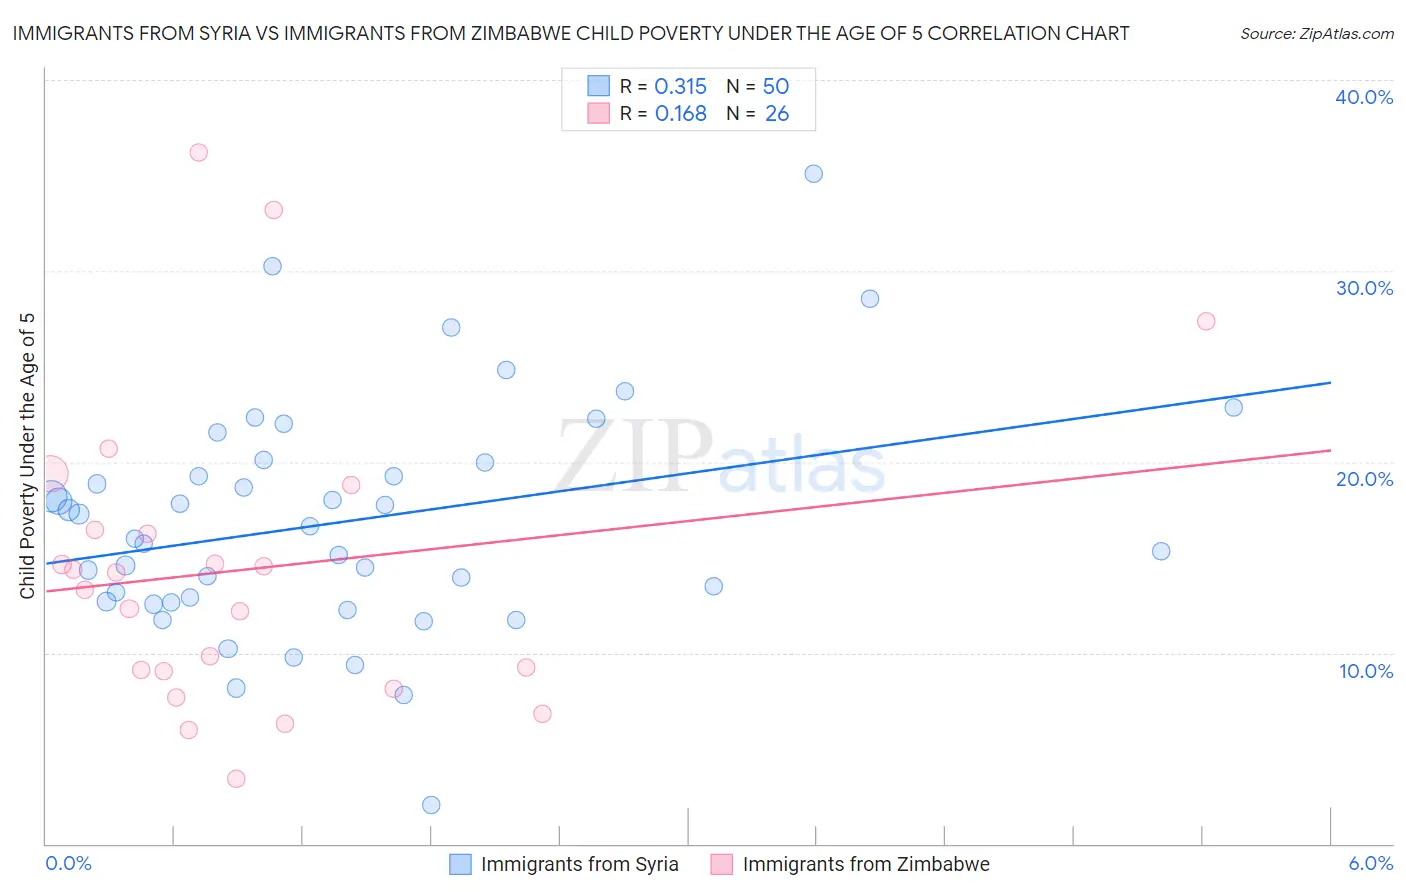 Immigrants from Syria vs Immigrants from Zimbabwe Child Poverty Under the Age of 5